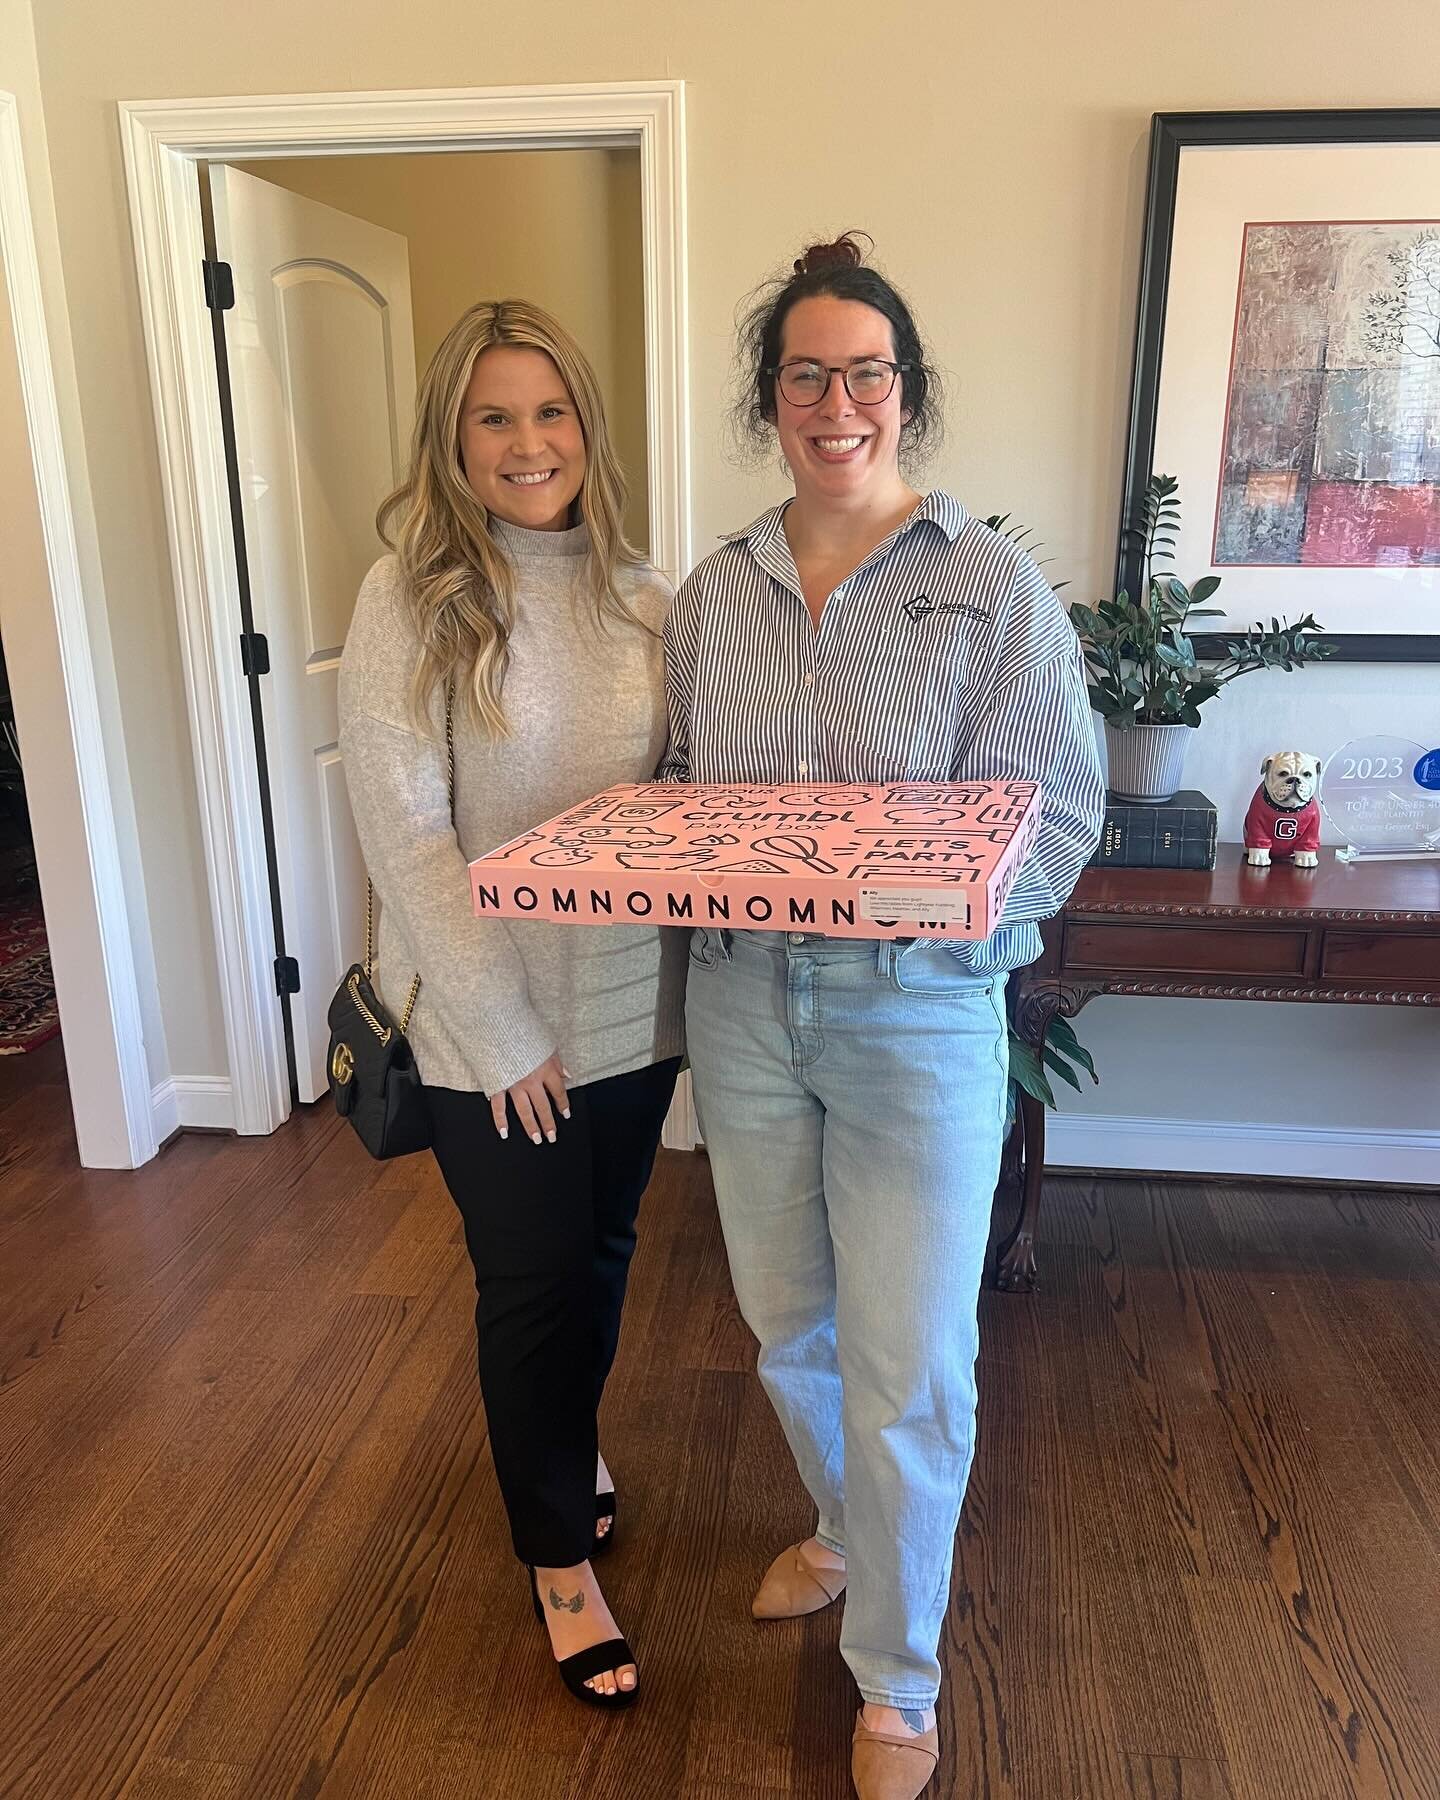 Ally crumbl&rsquo;ing cookies at @geigerlegal today! Love our Canton attorneys! Follow Casey now!!!! @casey_geiger @geigerlegal 

#lightyearfunding #personalinjury #mri #geiger